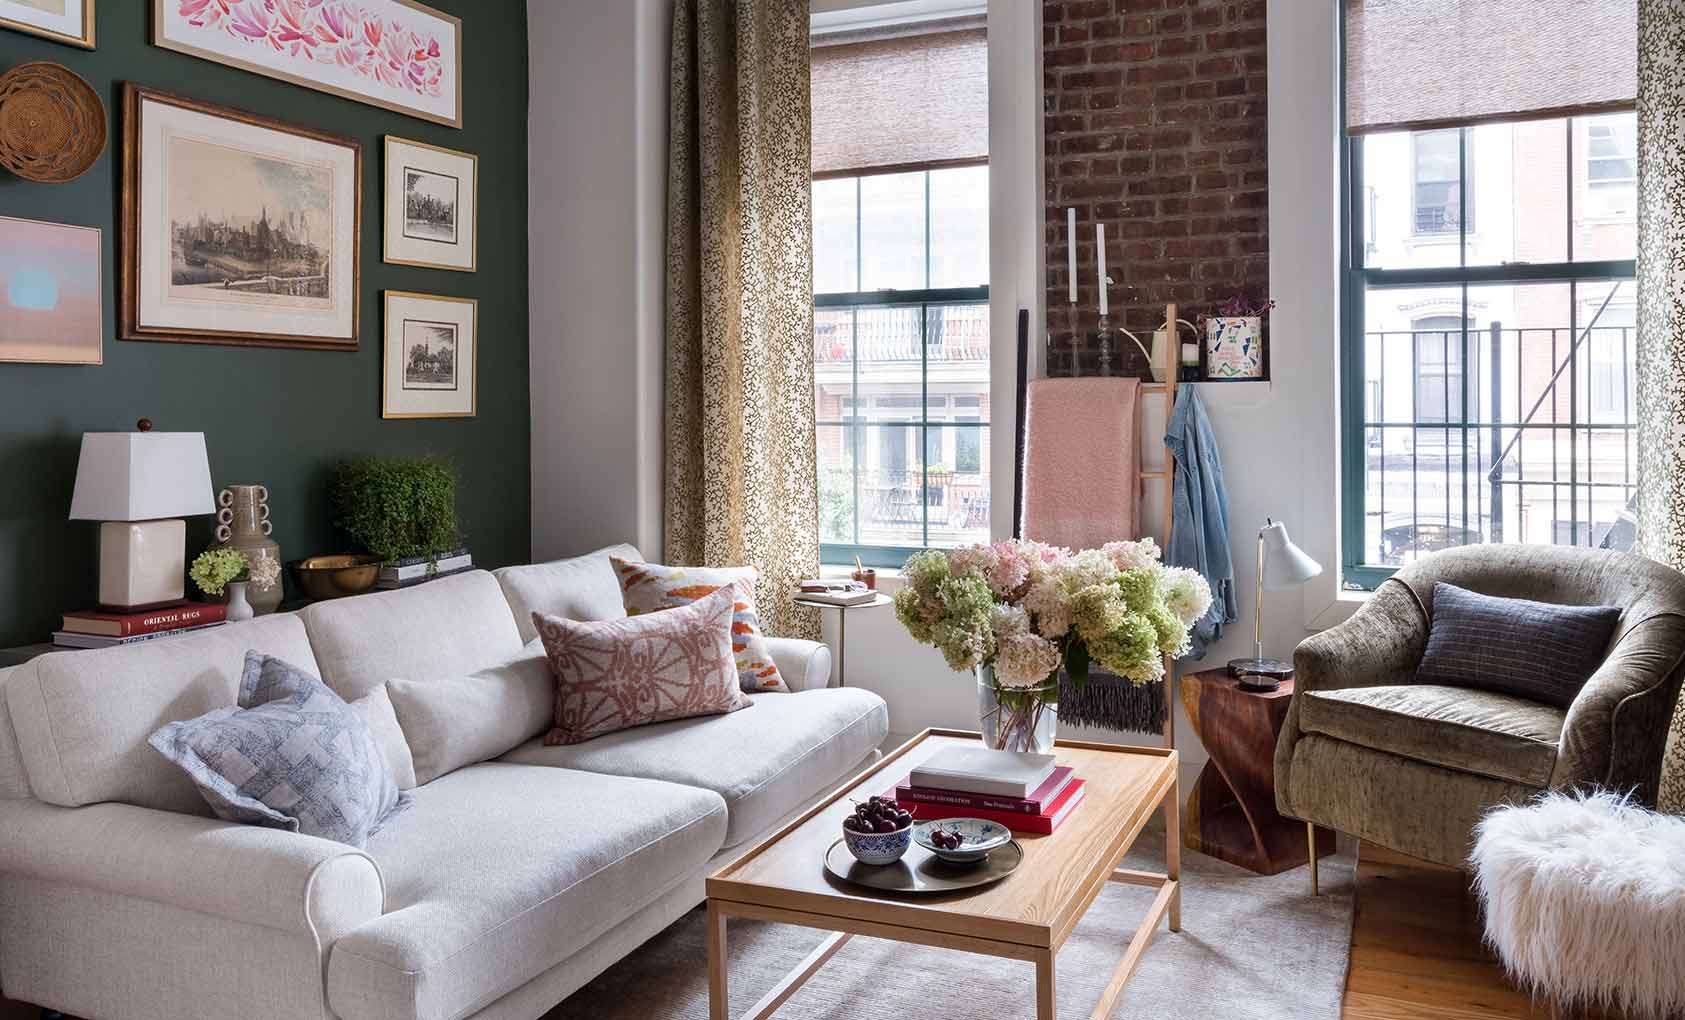 A dreamy Brooklyn apartment inspired by movies of the 1990s